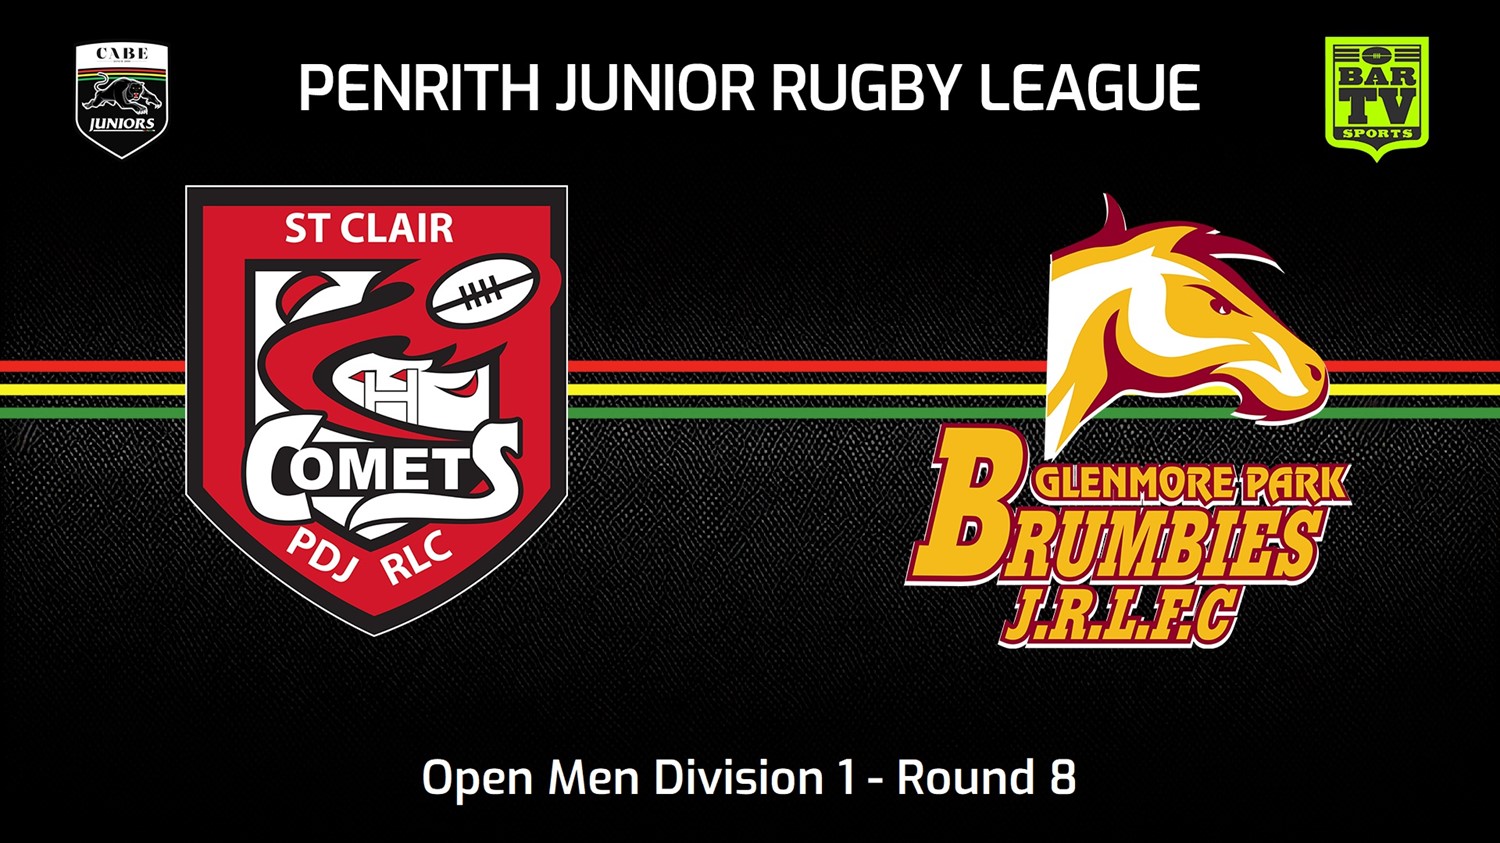 240602-video-Penrith & District Junior Rugby League Round 8 - Open Men Division 1 - St Clair v Glenmore Park Brumbies Slate Image